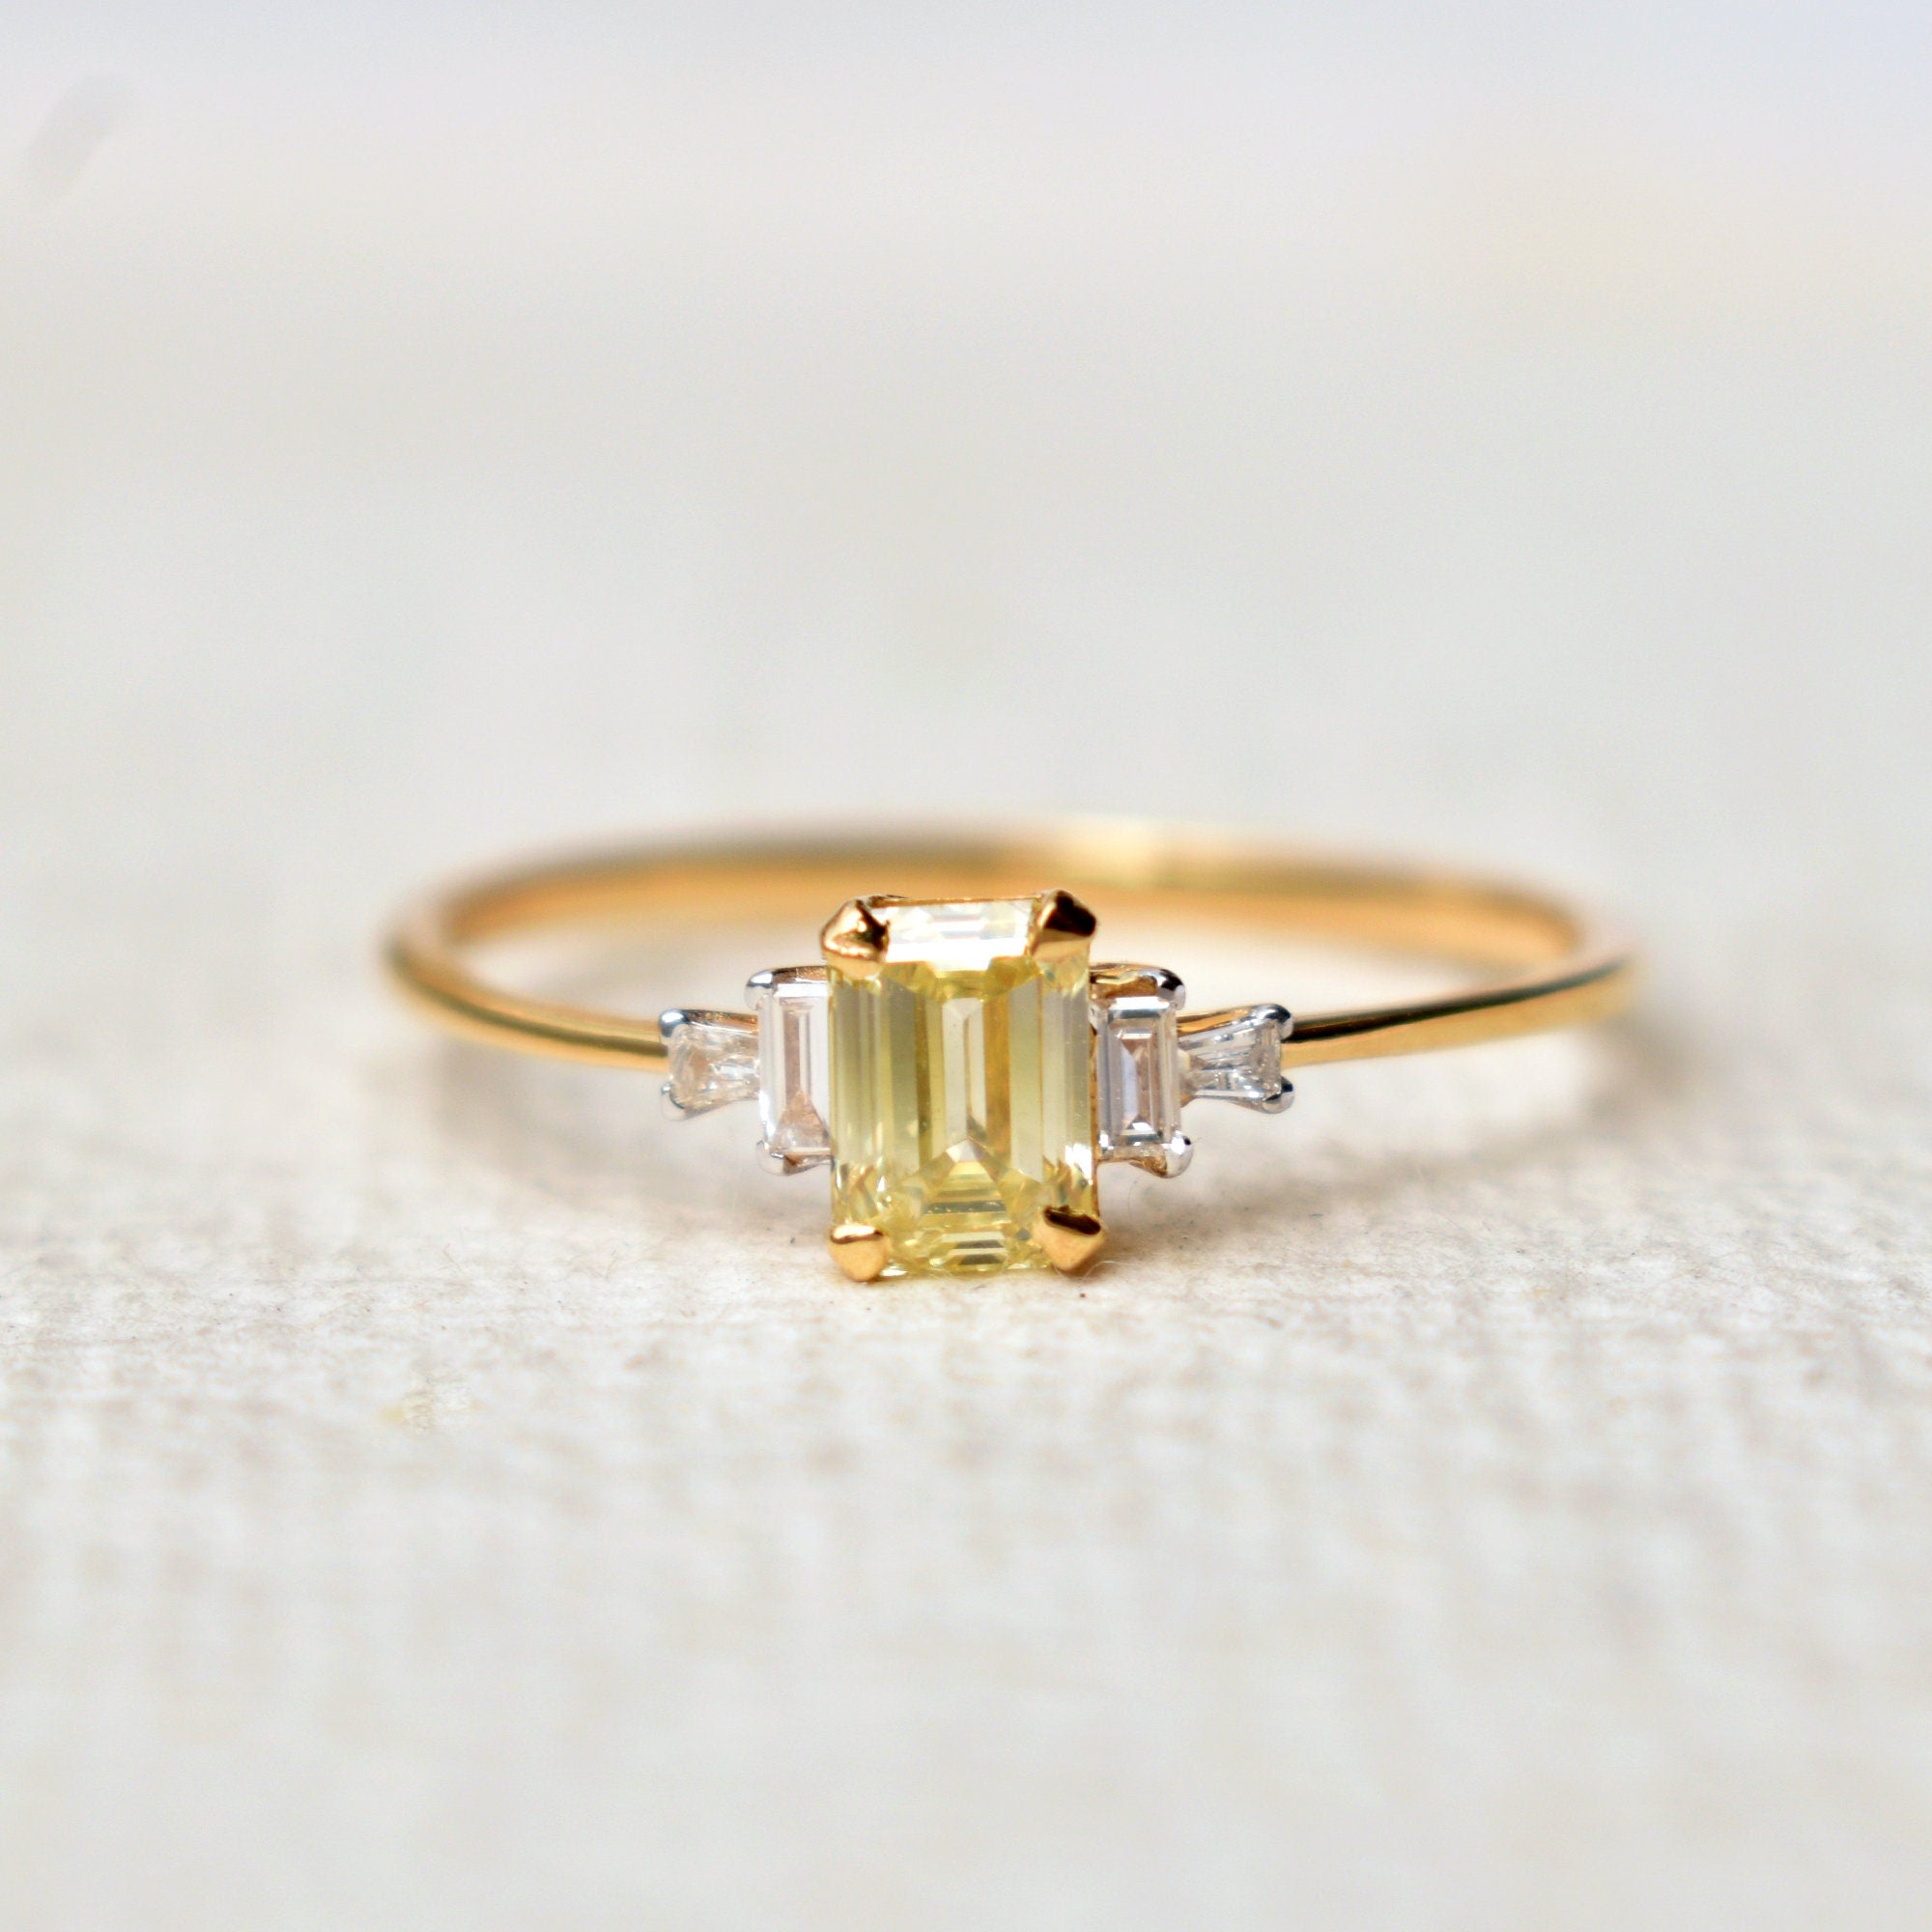 Natural Yellow Diamond Engagement Ring with White Baguette Diamond Accents, 14K Solid Yellow Gold Emerald Cut Ring, 5 Diamond Cluster Ring